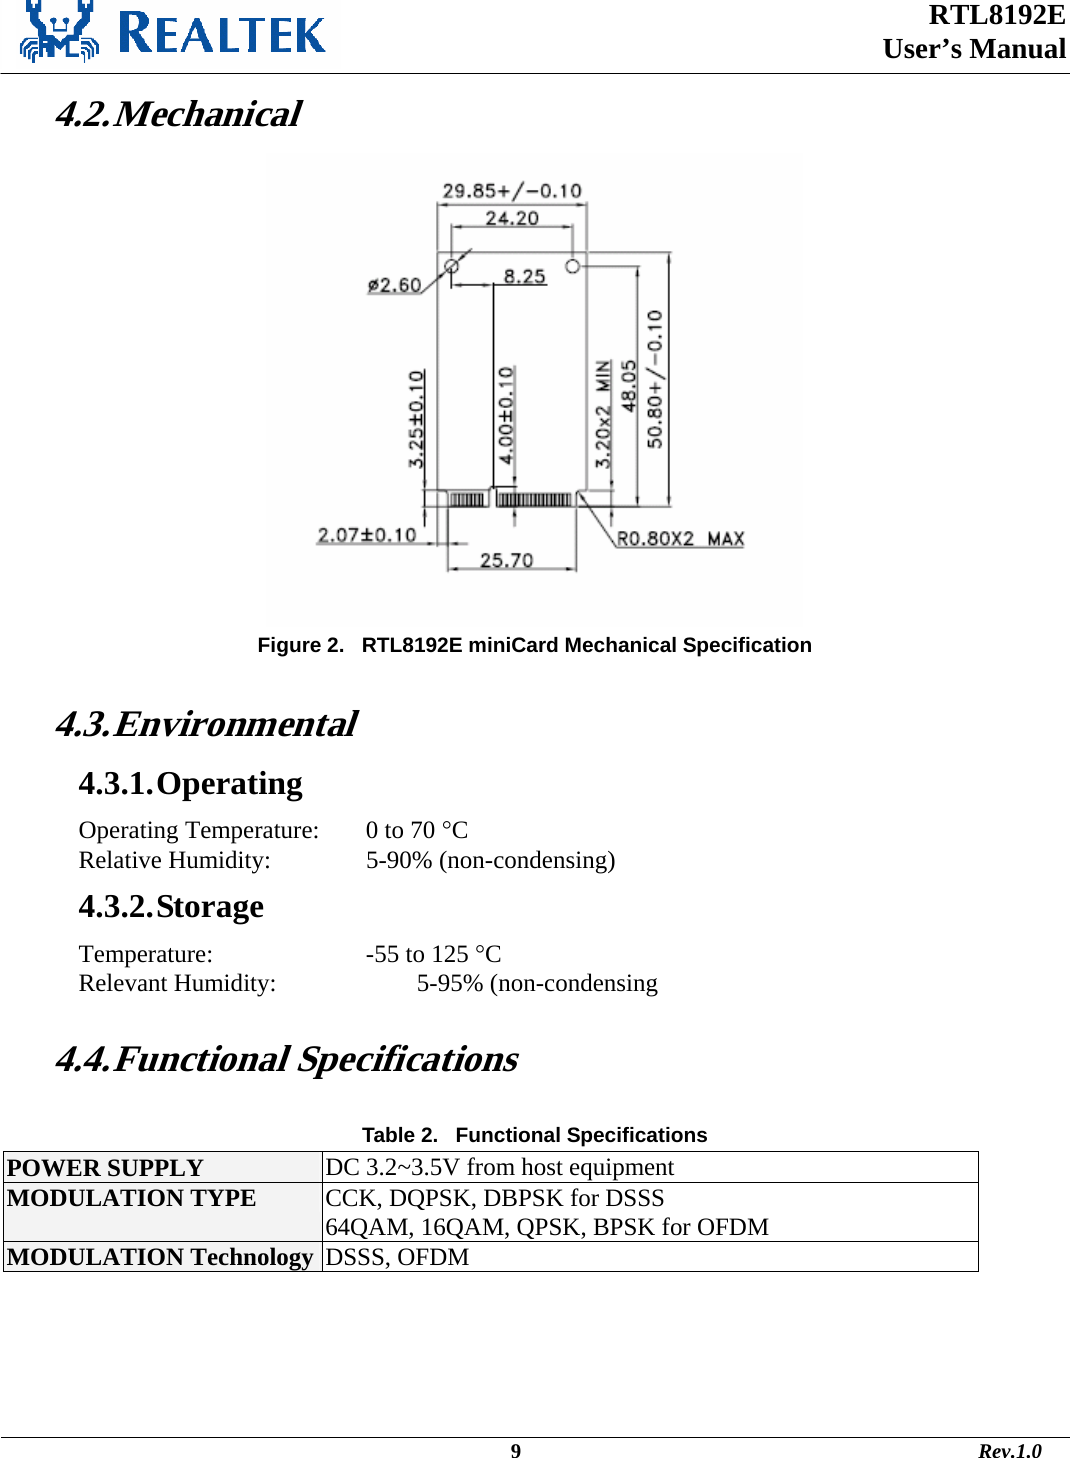  RTL8192E  User’s Manual                                                                                             9                                                                                       Rev.1.0    4.2. Mechanical  Figure 2.   RTL8192E miniCard Mechanical Specification  4.3. Environmental 4.3.1. Operating Operating Temperature:   0 to 70 °C Relative Humidity:     5-90% (non-condensing) 4.3.2. Storage Temperature:       -55 to 125 °C  Relevant Humidity:       5-95% (non-condensing  4.4. Functional Specifications  Table 2.   Functional Specifications POWER SUPPLY  DC 3.2~3.5V from host equipment MODULATION TYPE  CCK, DQPSK, DBPSK for DSSS 64QAM, 16QAM, QPSK, BPSK for OFDM MODULATION Technology  DSSS, OFDM 